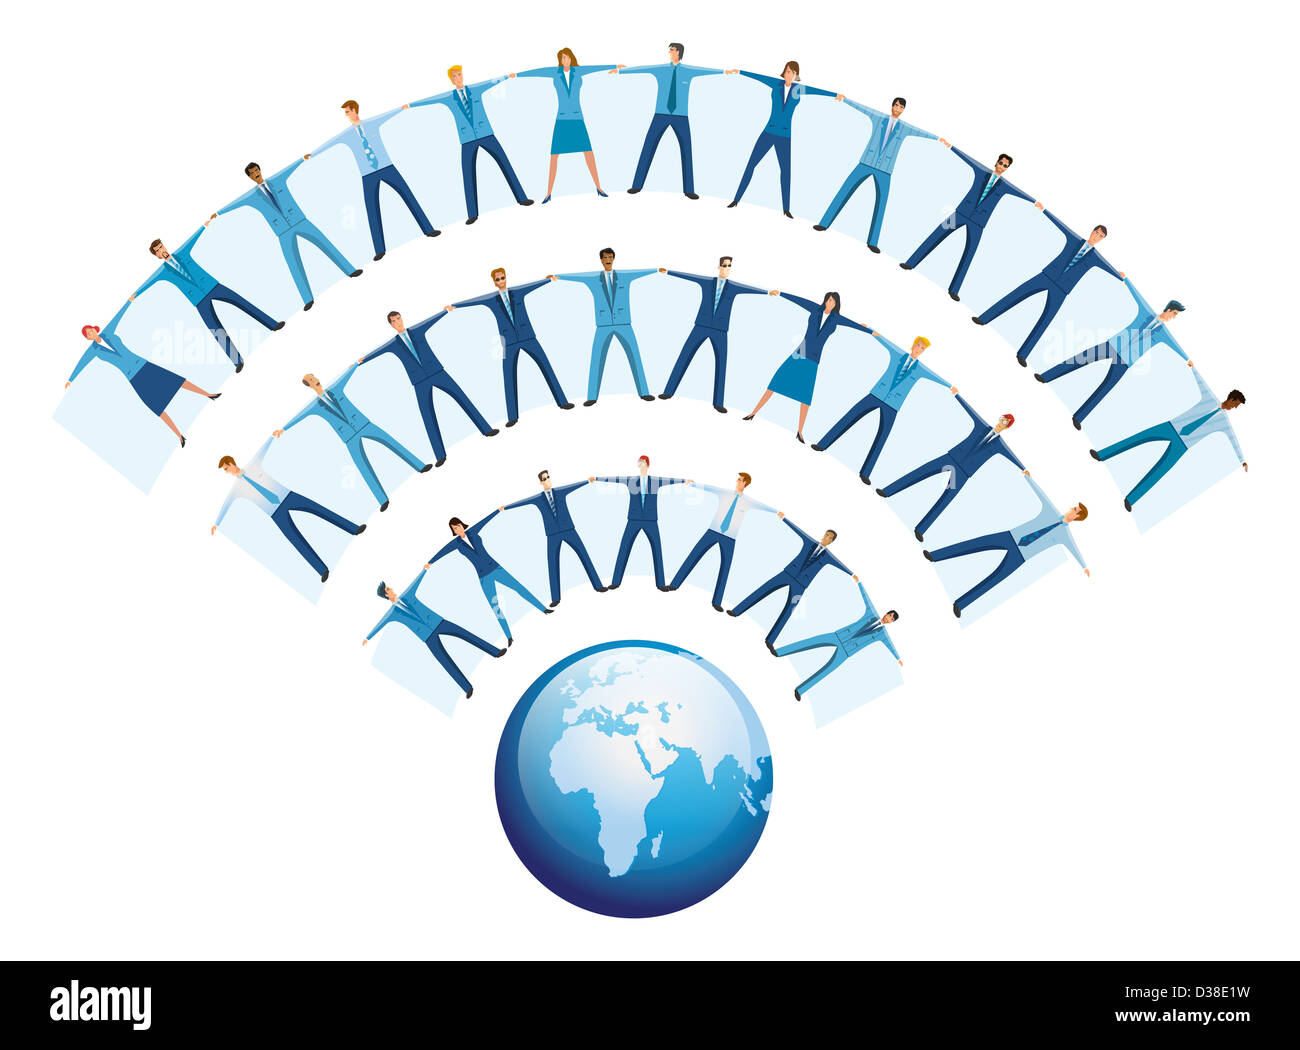 Team of business people forming WIFI symbol wave Stock Photo